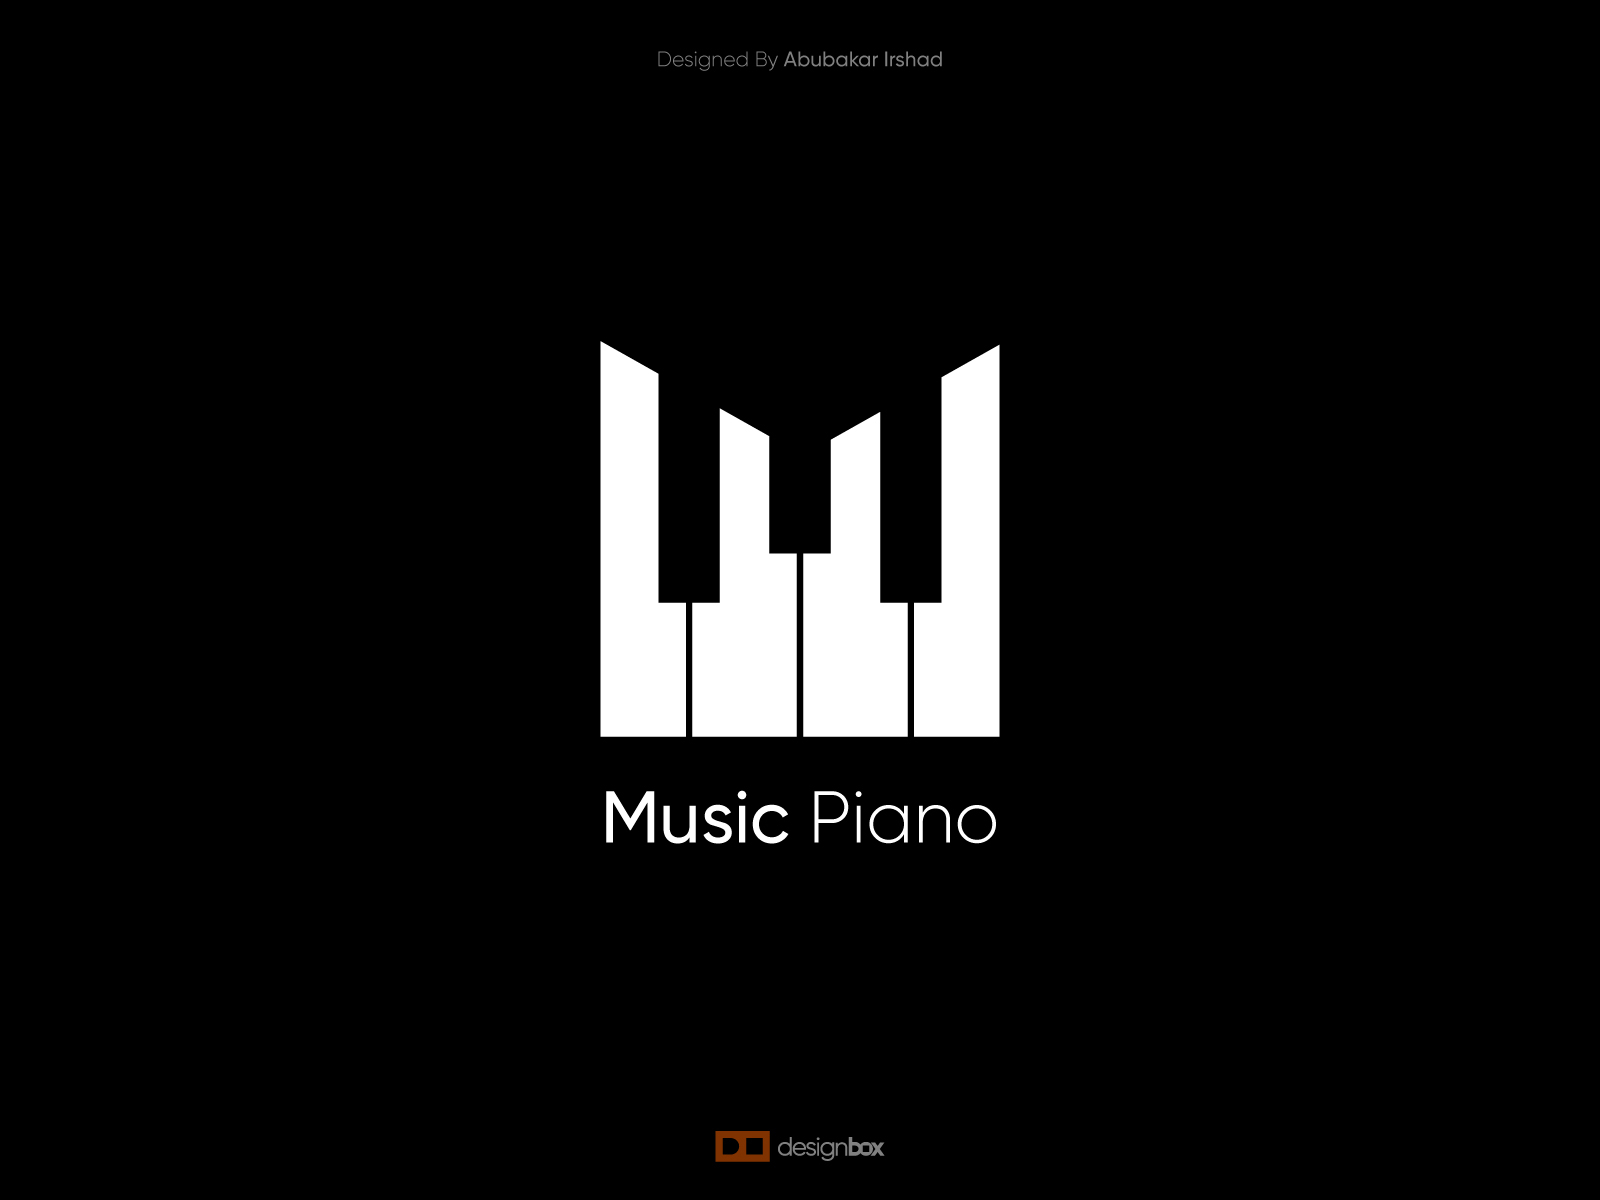 Free: Simple piano with crown logo design vector image - nohat.cc